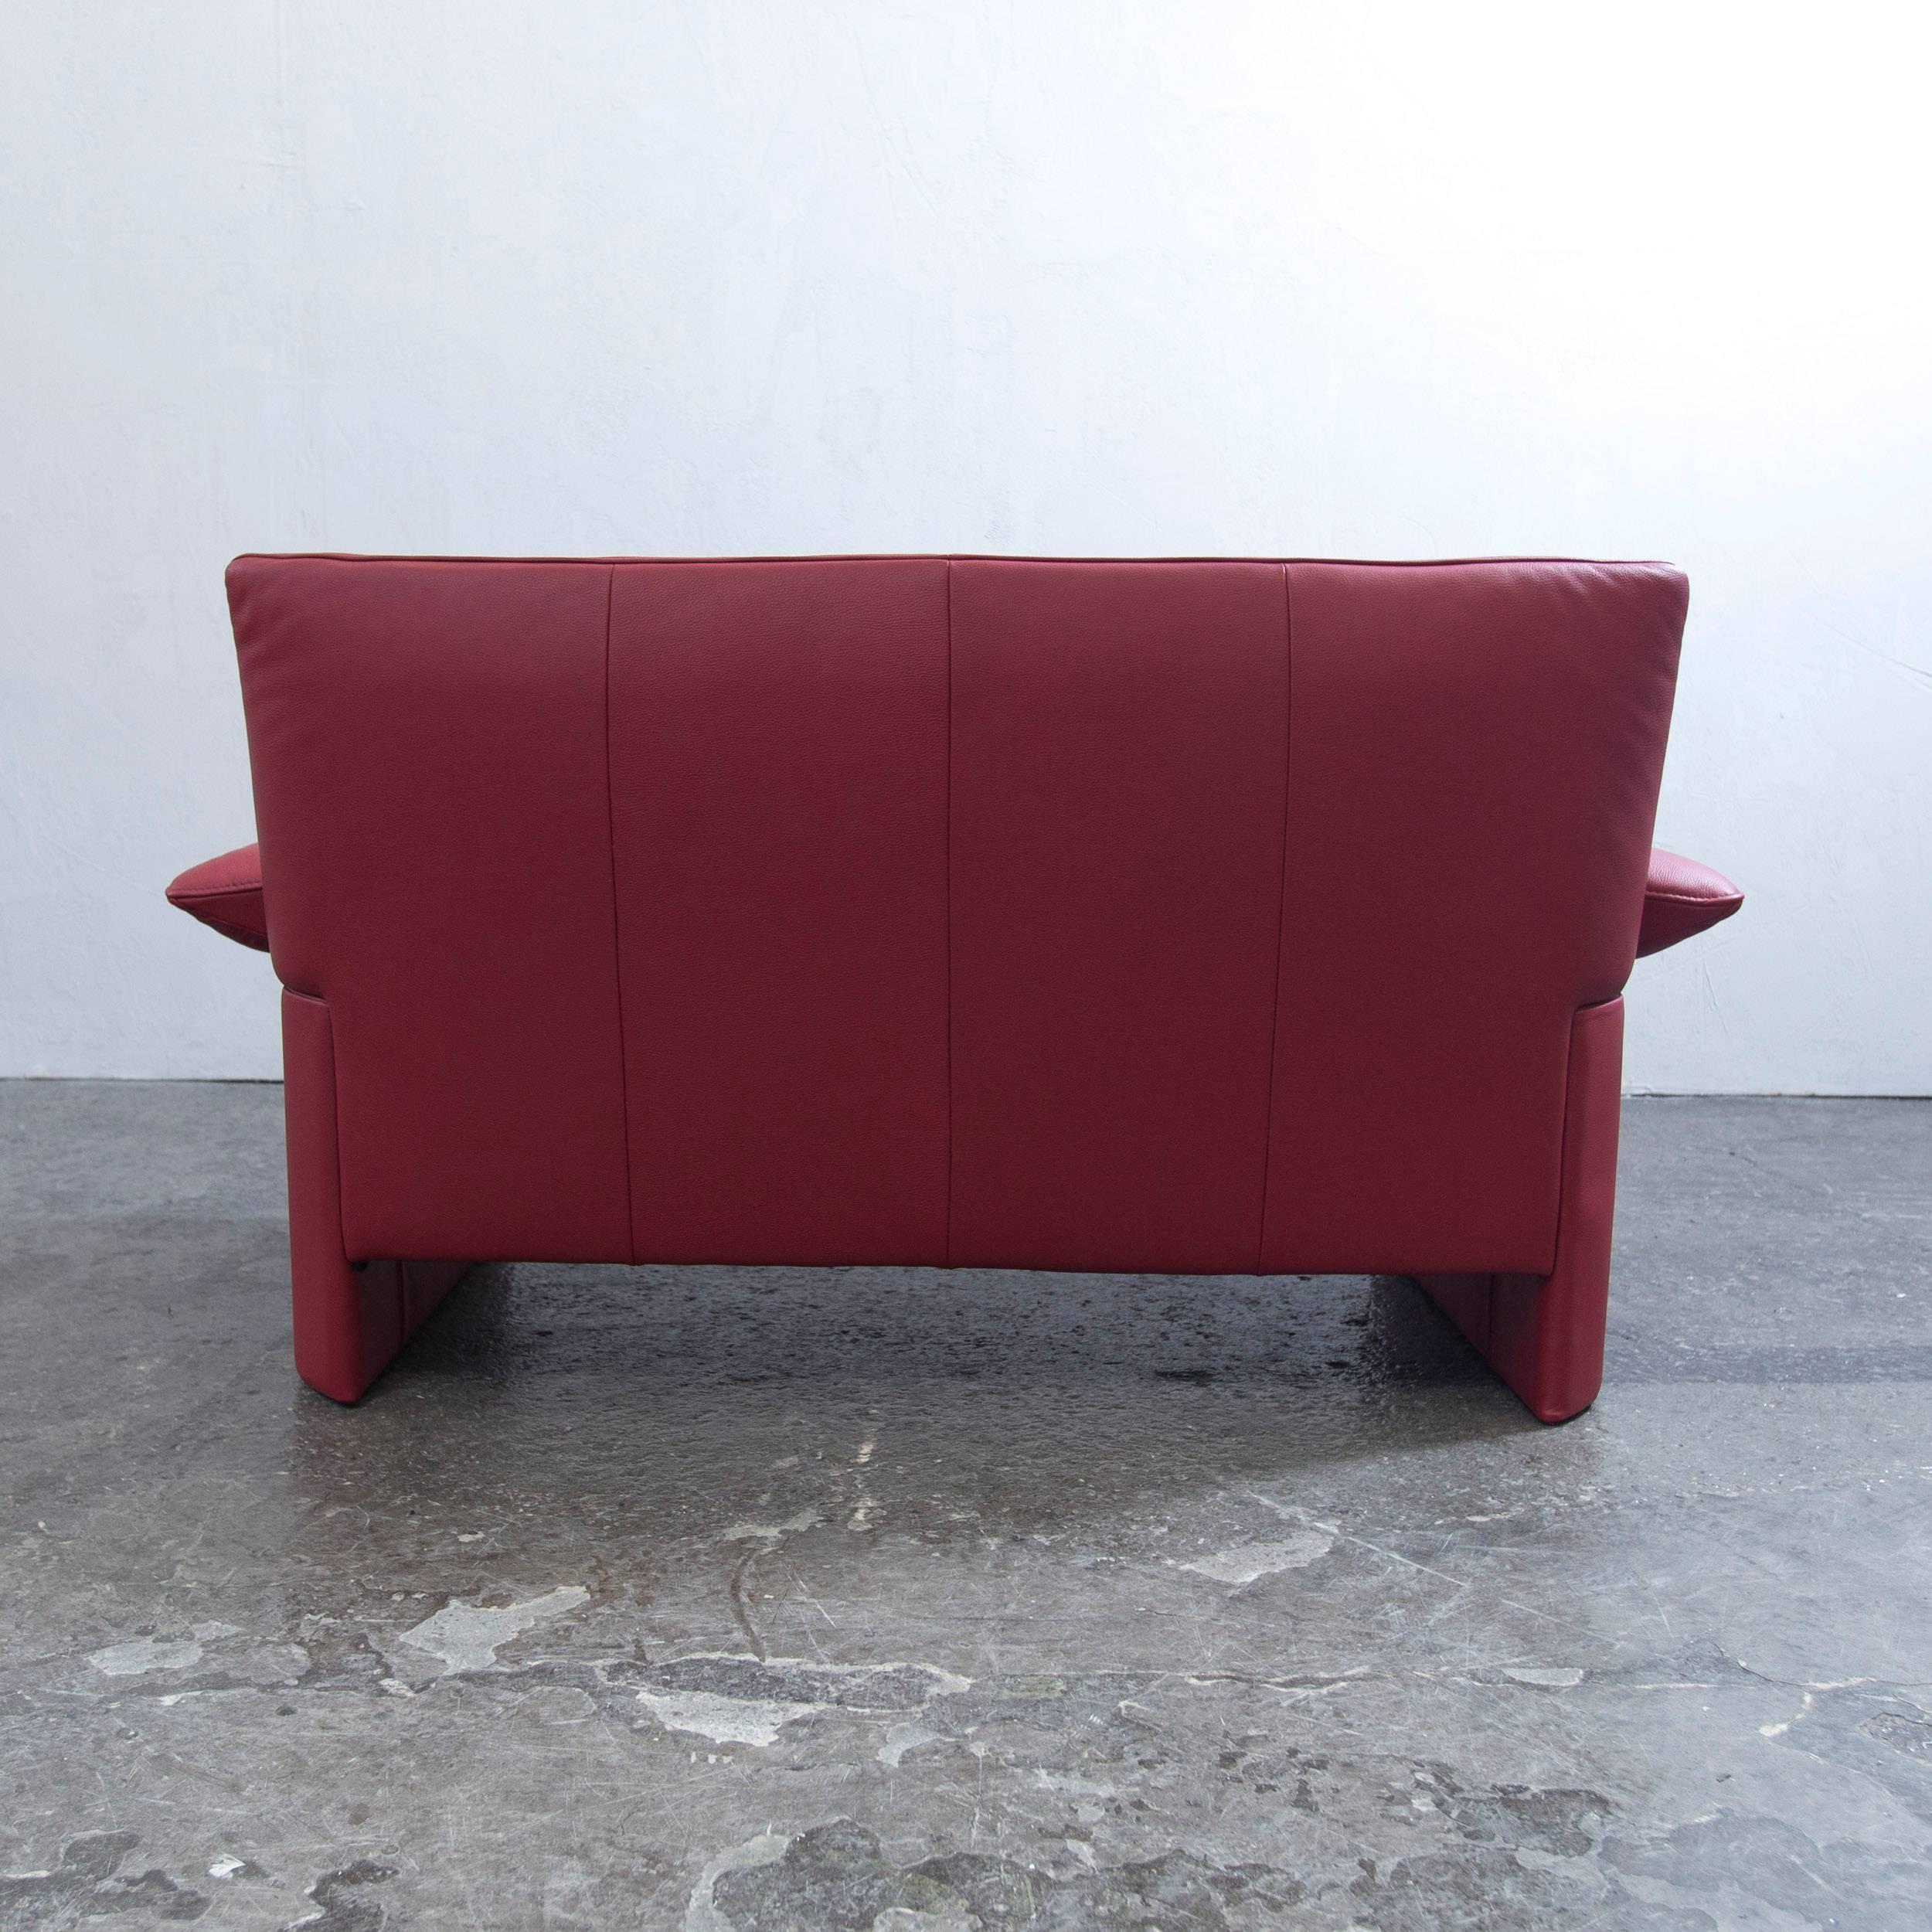 Jori Designer Sofa Red Leather Two-Seat Couch Function Modern 1